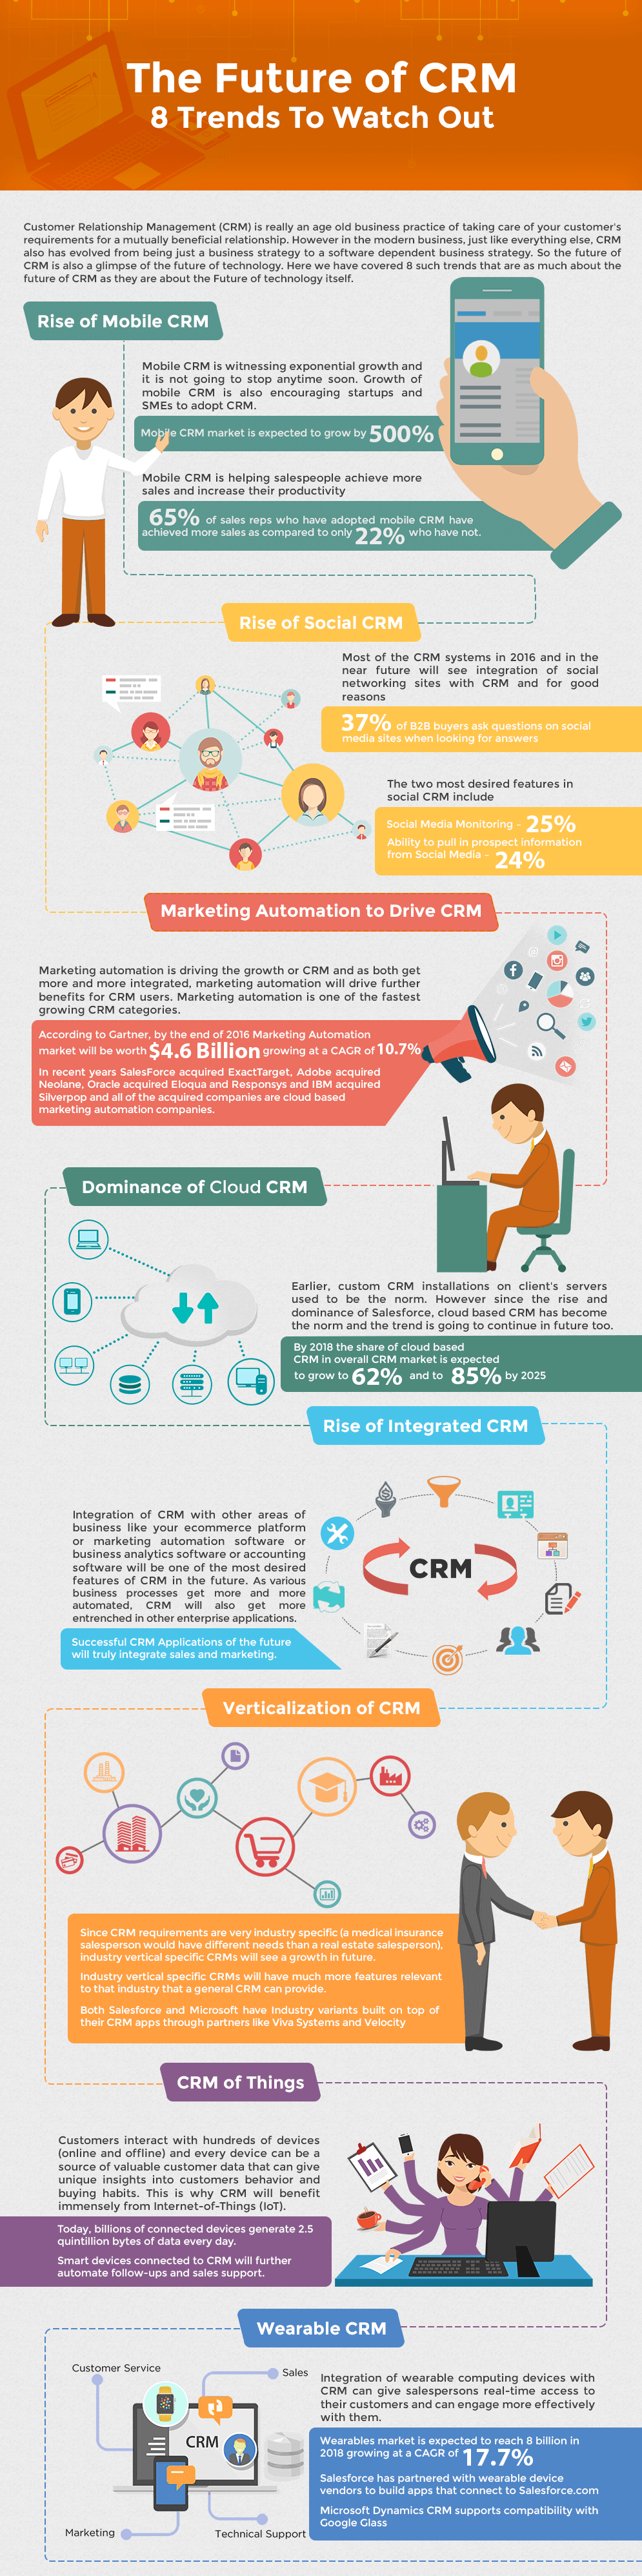 future-crm-8-trends-watch-out-infographic-plaza